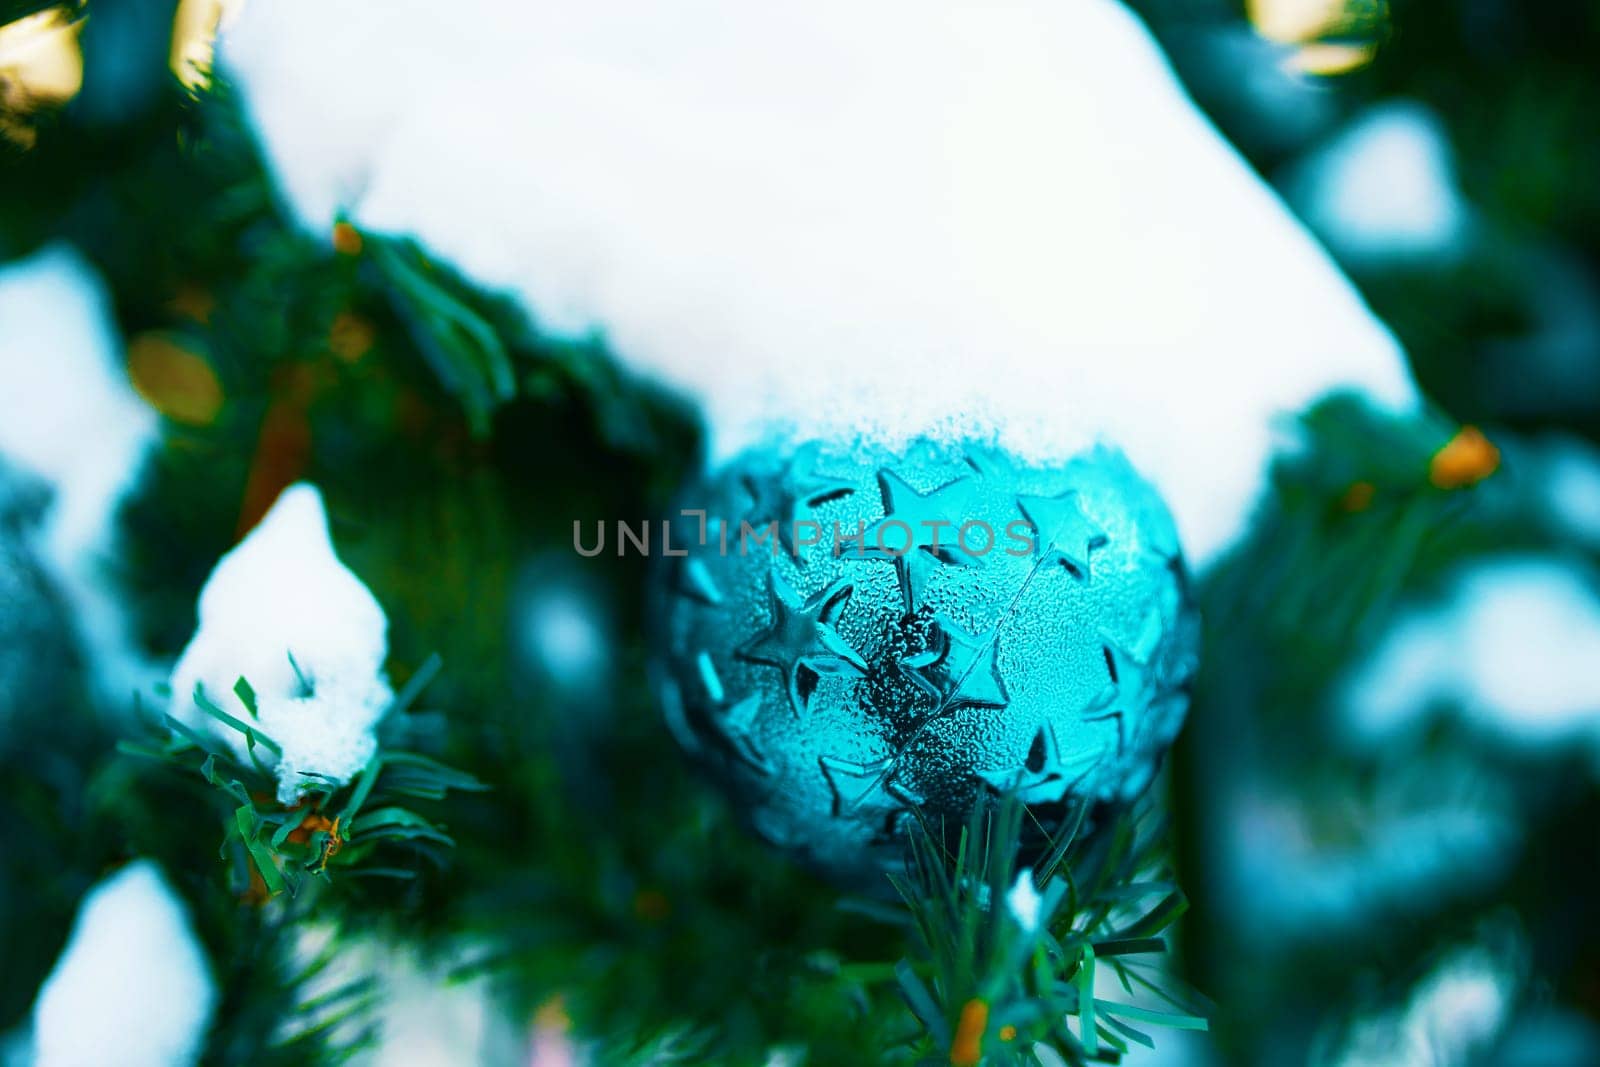 Decorated Christmas tree. Close-up of a blue bubble hanging from a decorated Christmas tree.